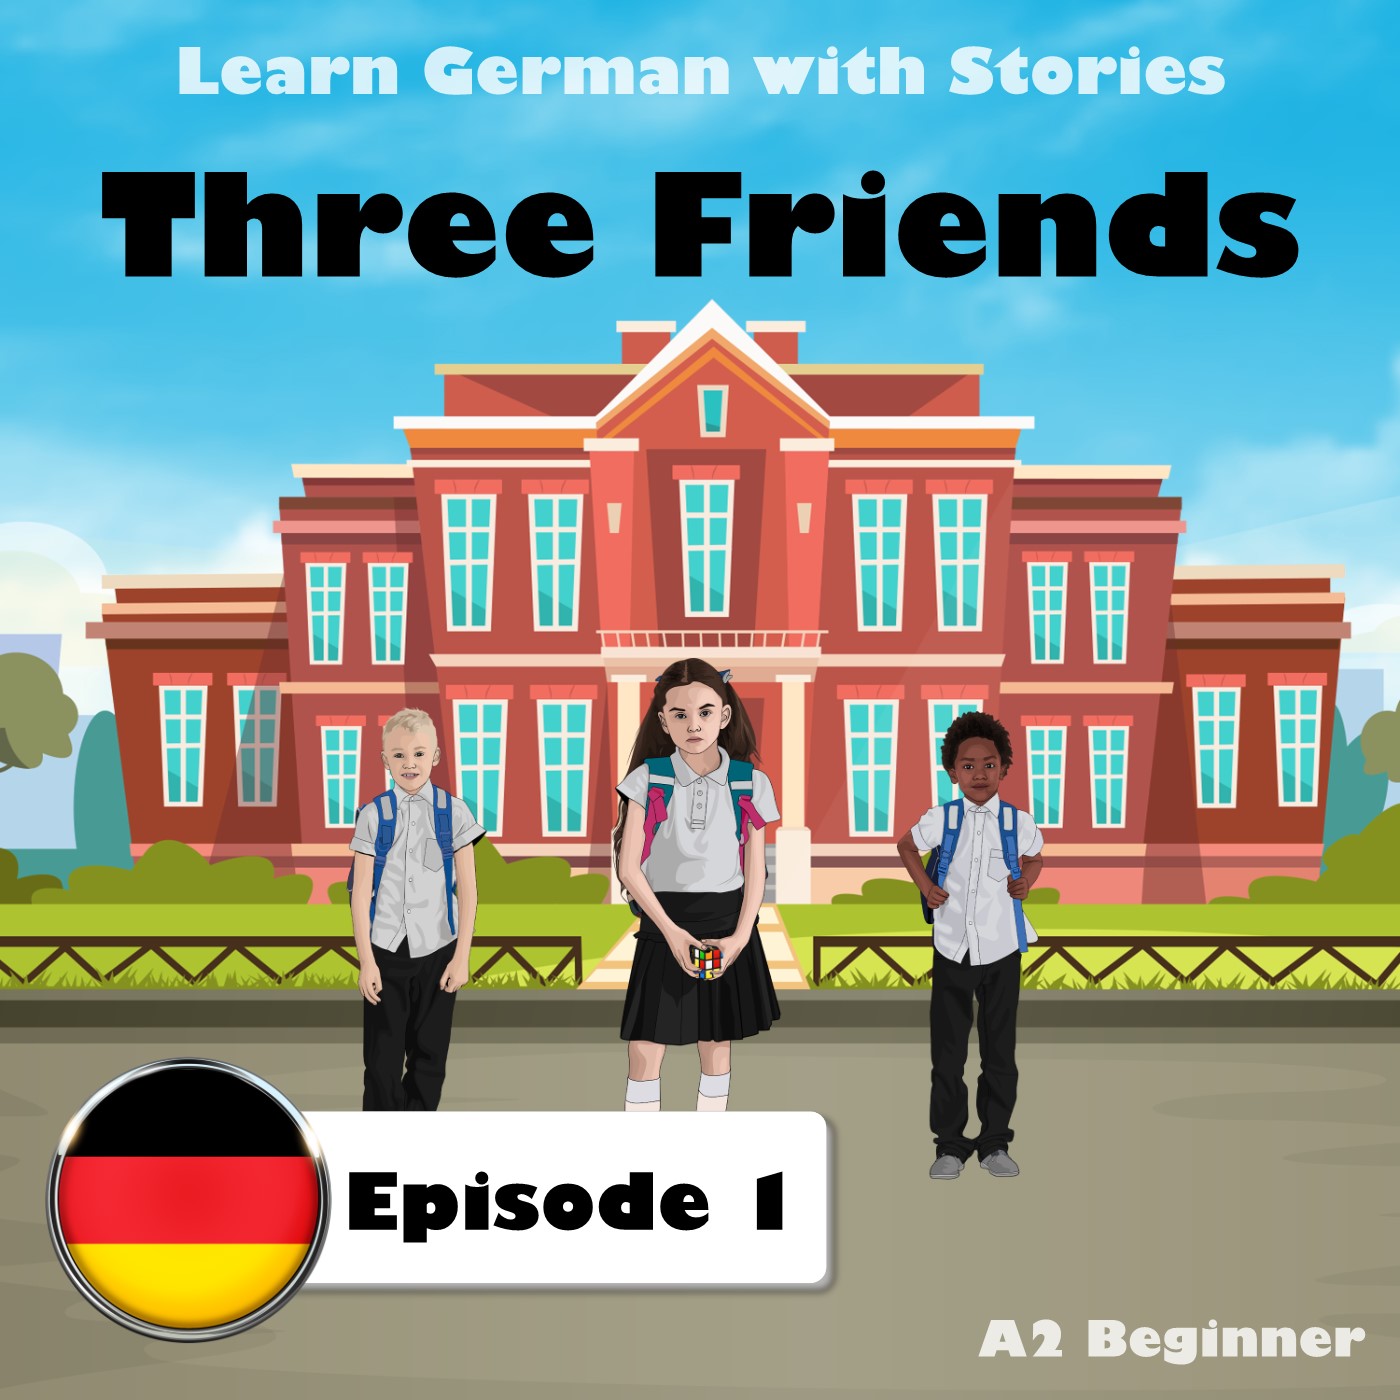 Learn German with Stories: Three Friends, Episode 1 (A2 Beginner)